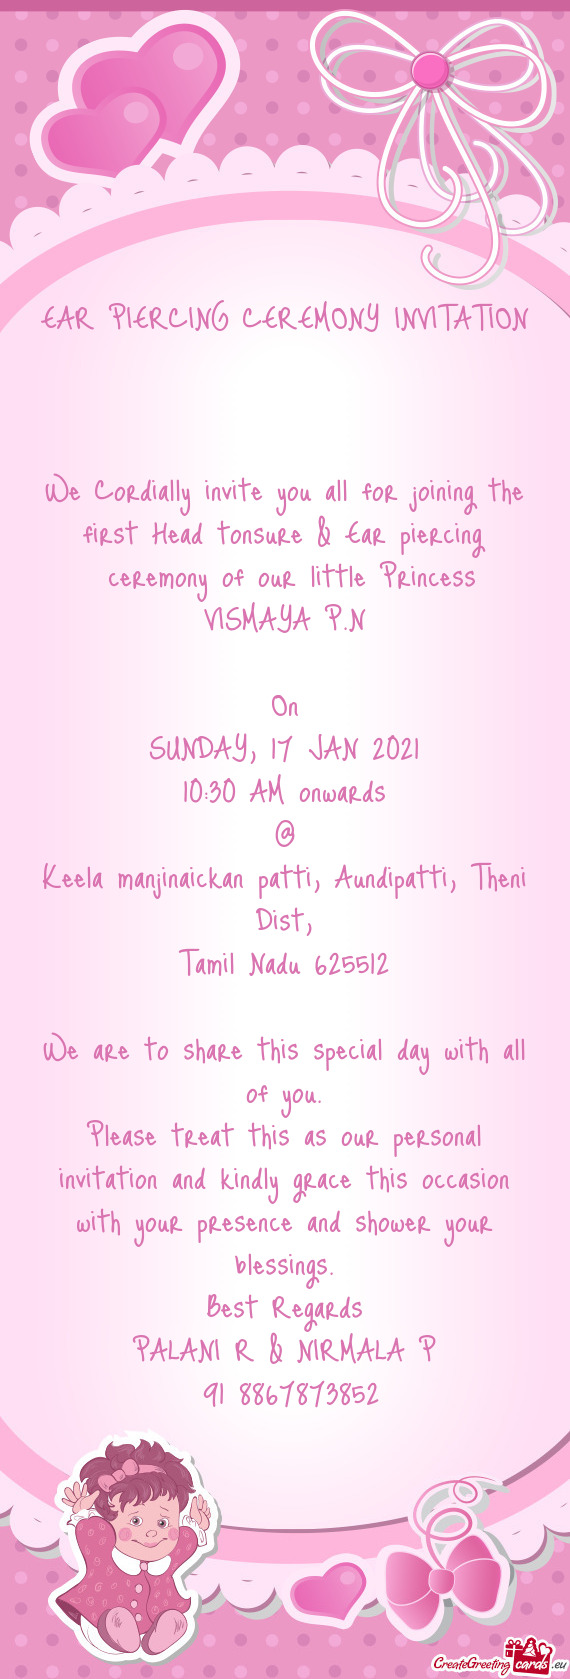 Please treat this as our personal invitation and kindly grace this occasion